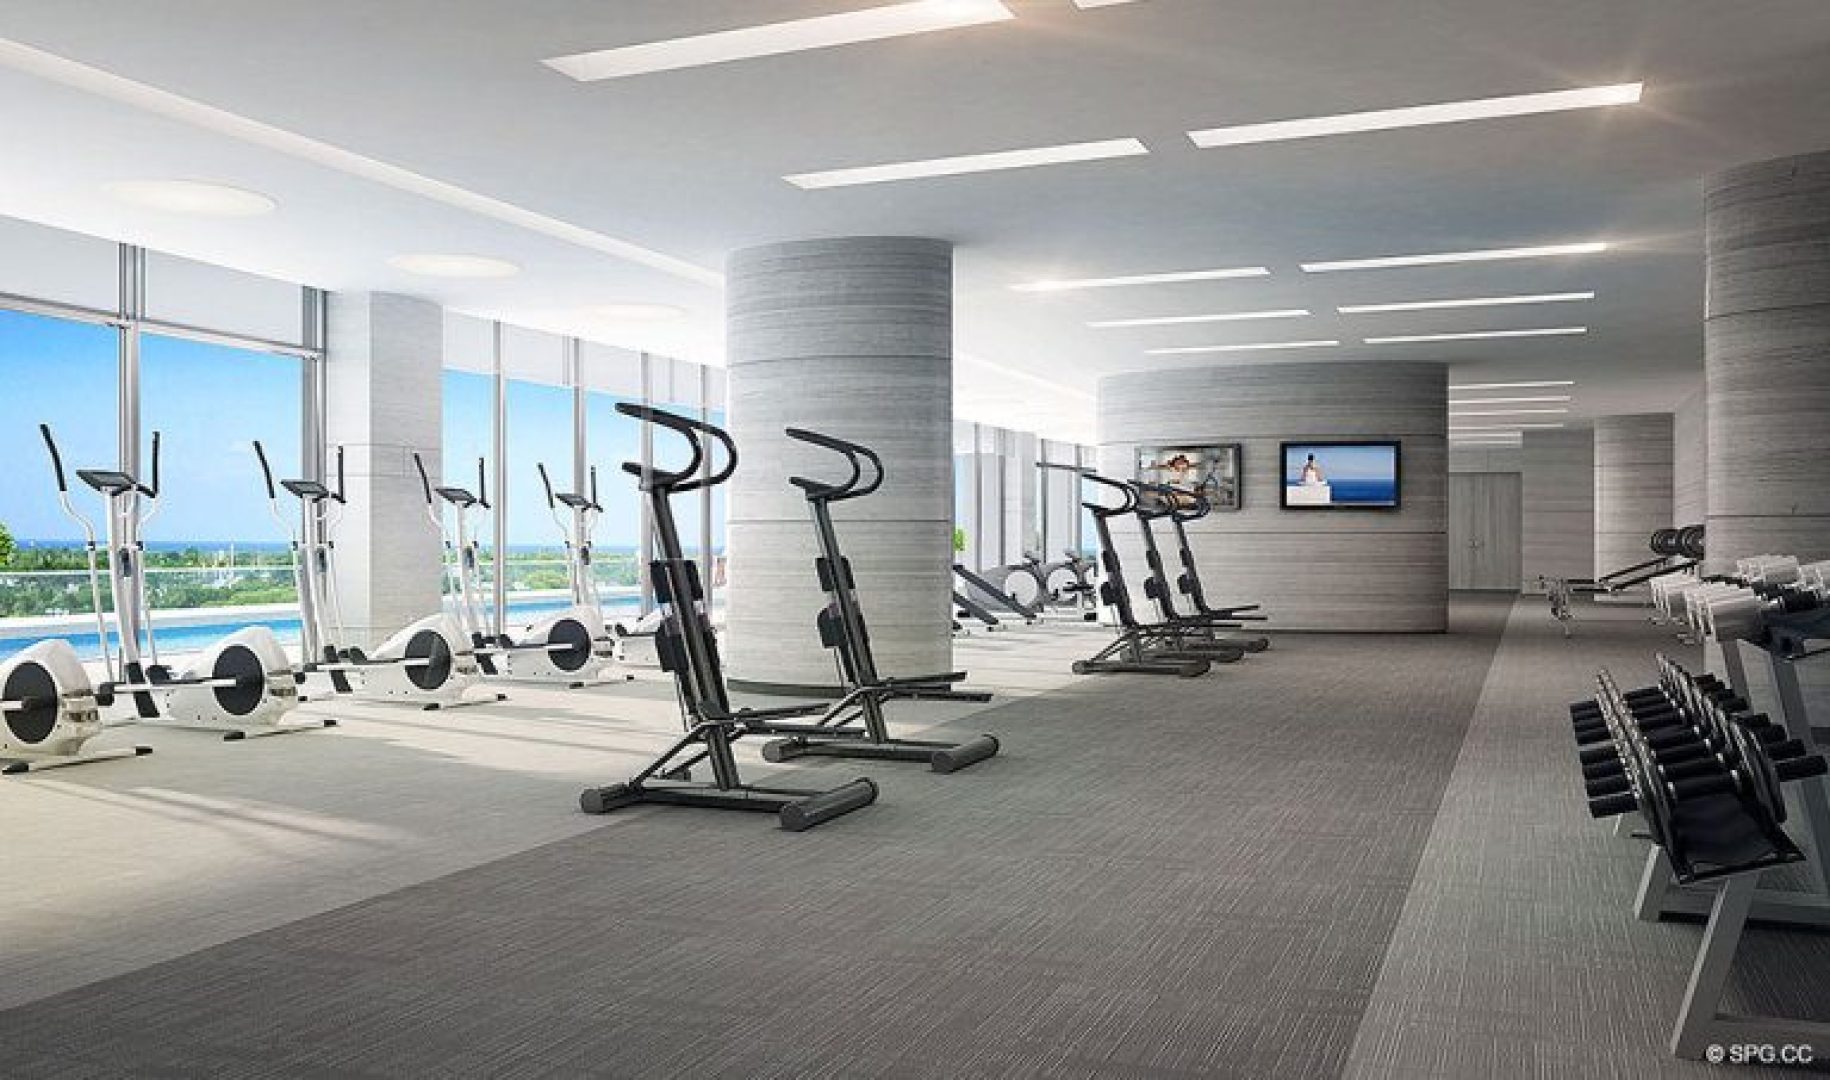 Fitness Center at Riva, Luxury Waterfront Condos in Fort Lauderdale, Florida 33304.